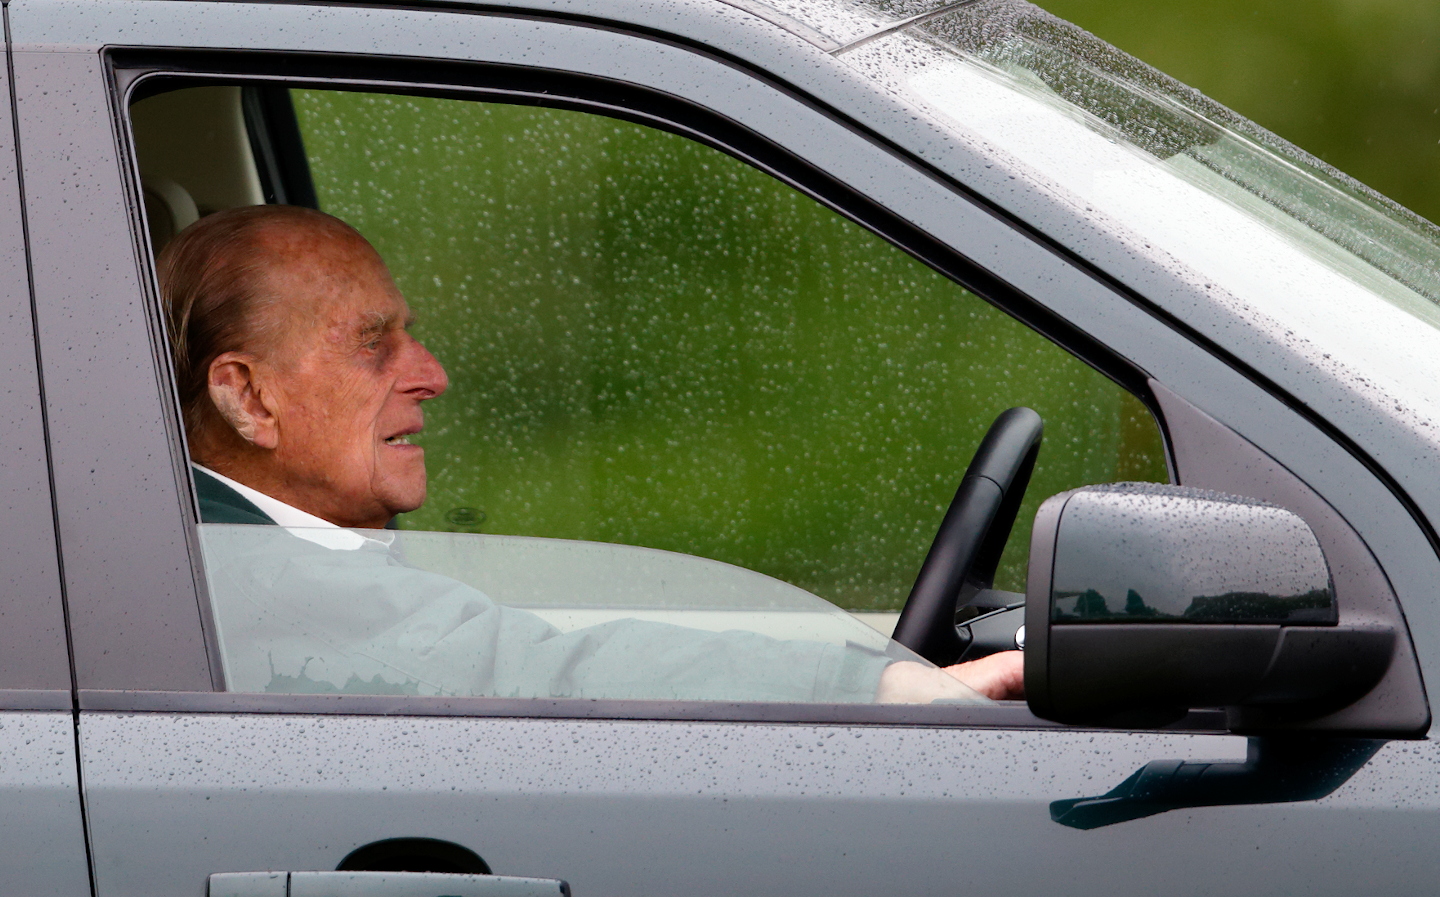 More over 90s follow Prince Philip’s lead and give up driving licences